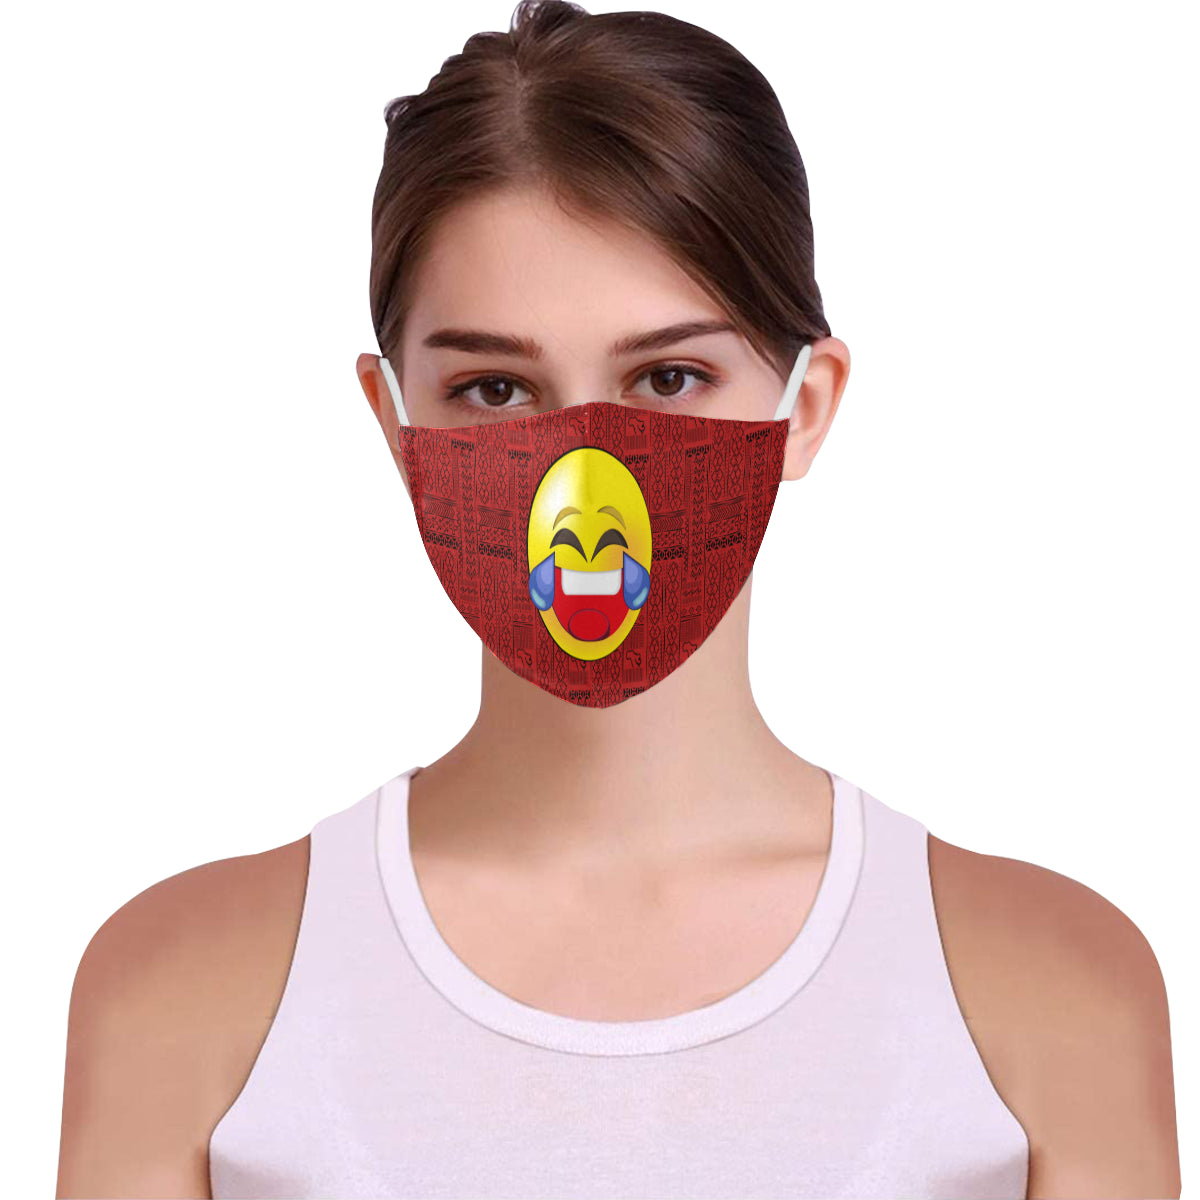 LOL Tribal Print Emoji Cotton Fabric Face Mask with Filter Slot and Adjustable Strap - Non-medical use (2 Filters Included)